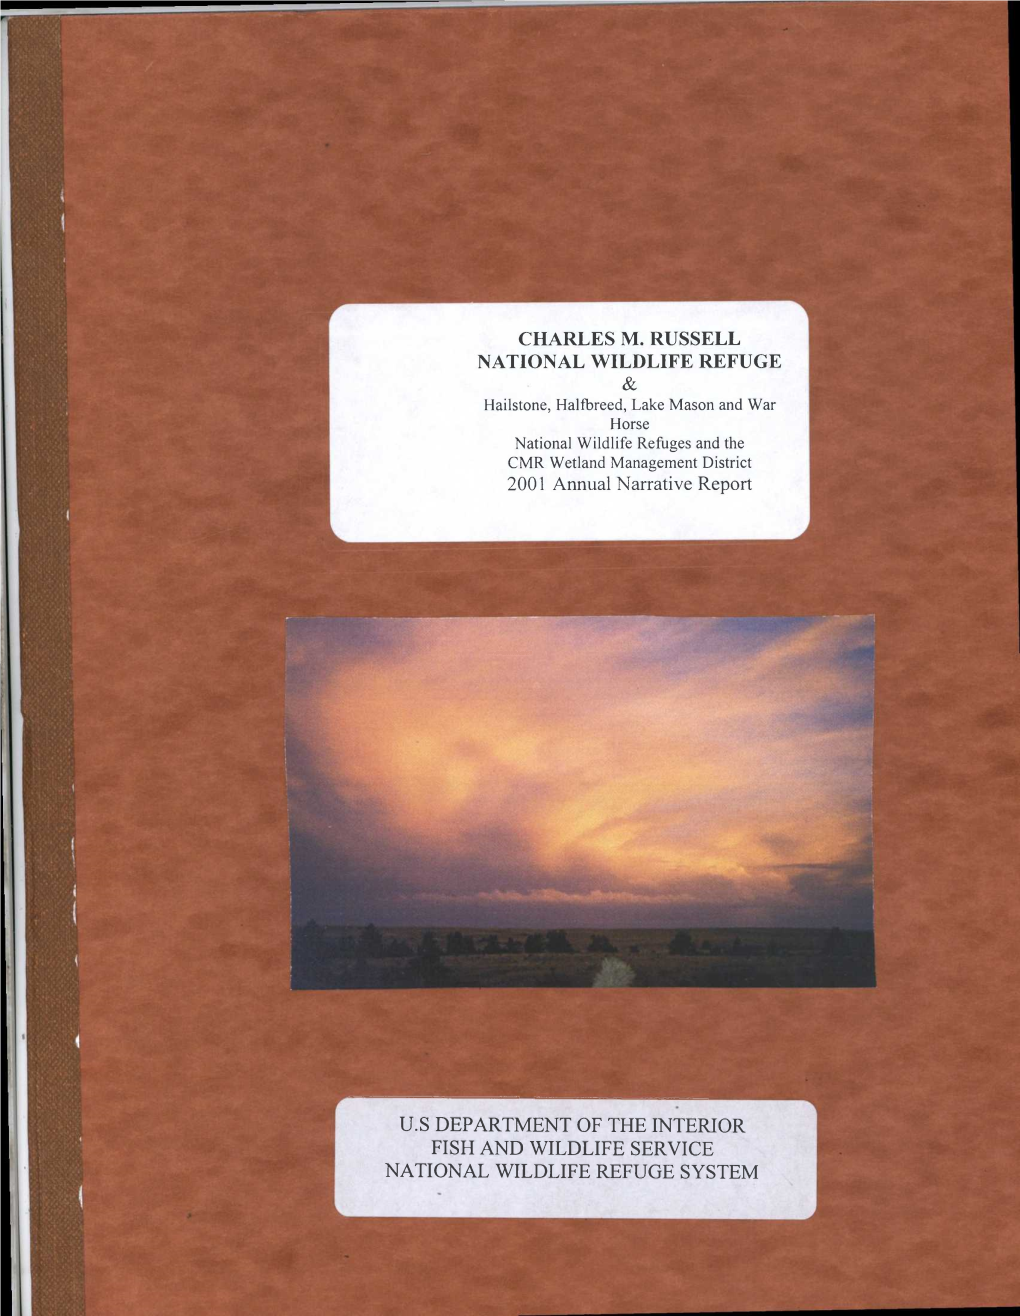 CHARLES M. RUSSELL NATIONAL WILDLIFE REFUGE 2001 Annual